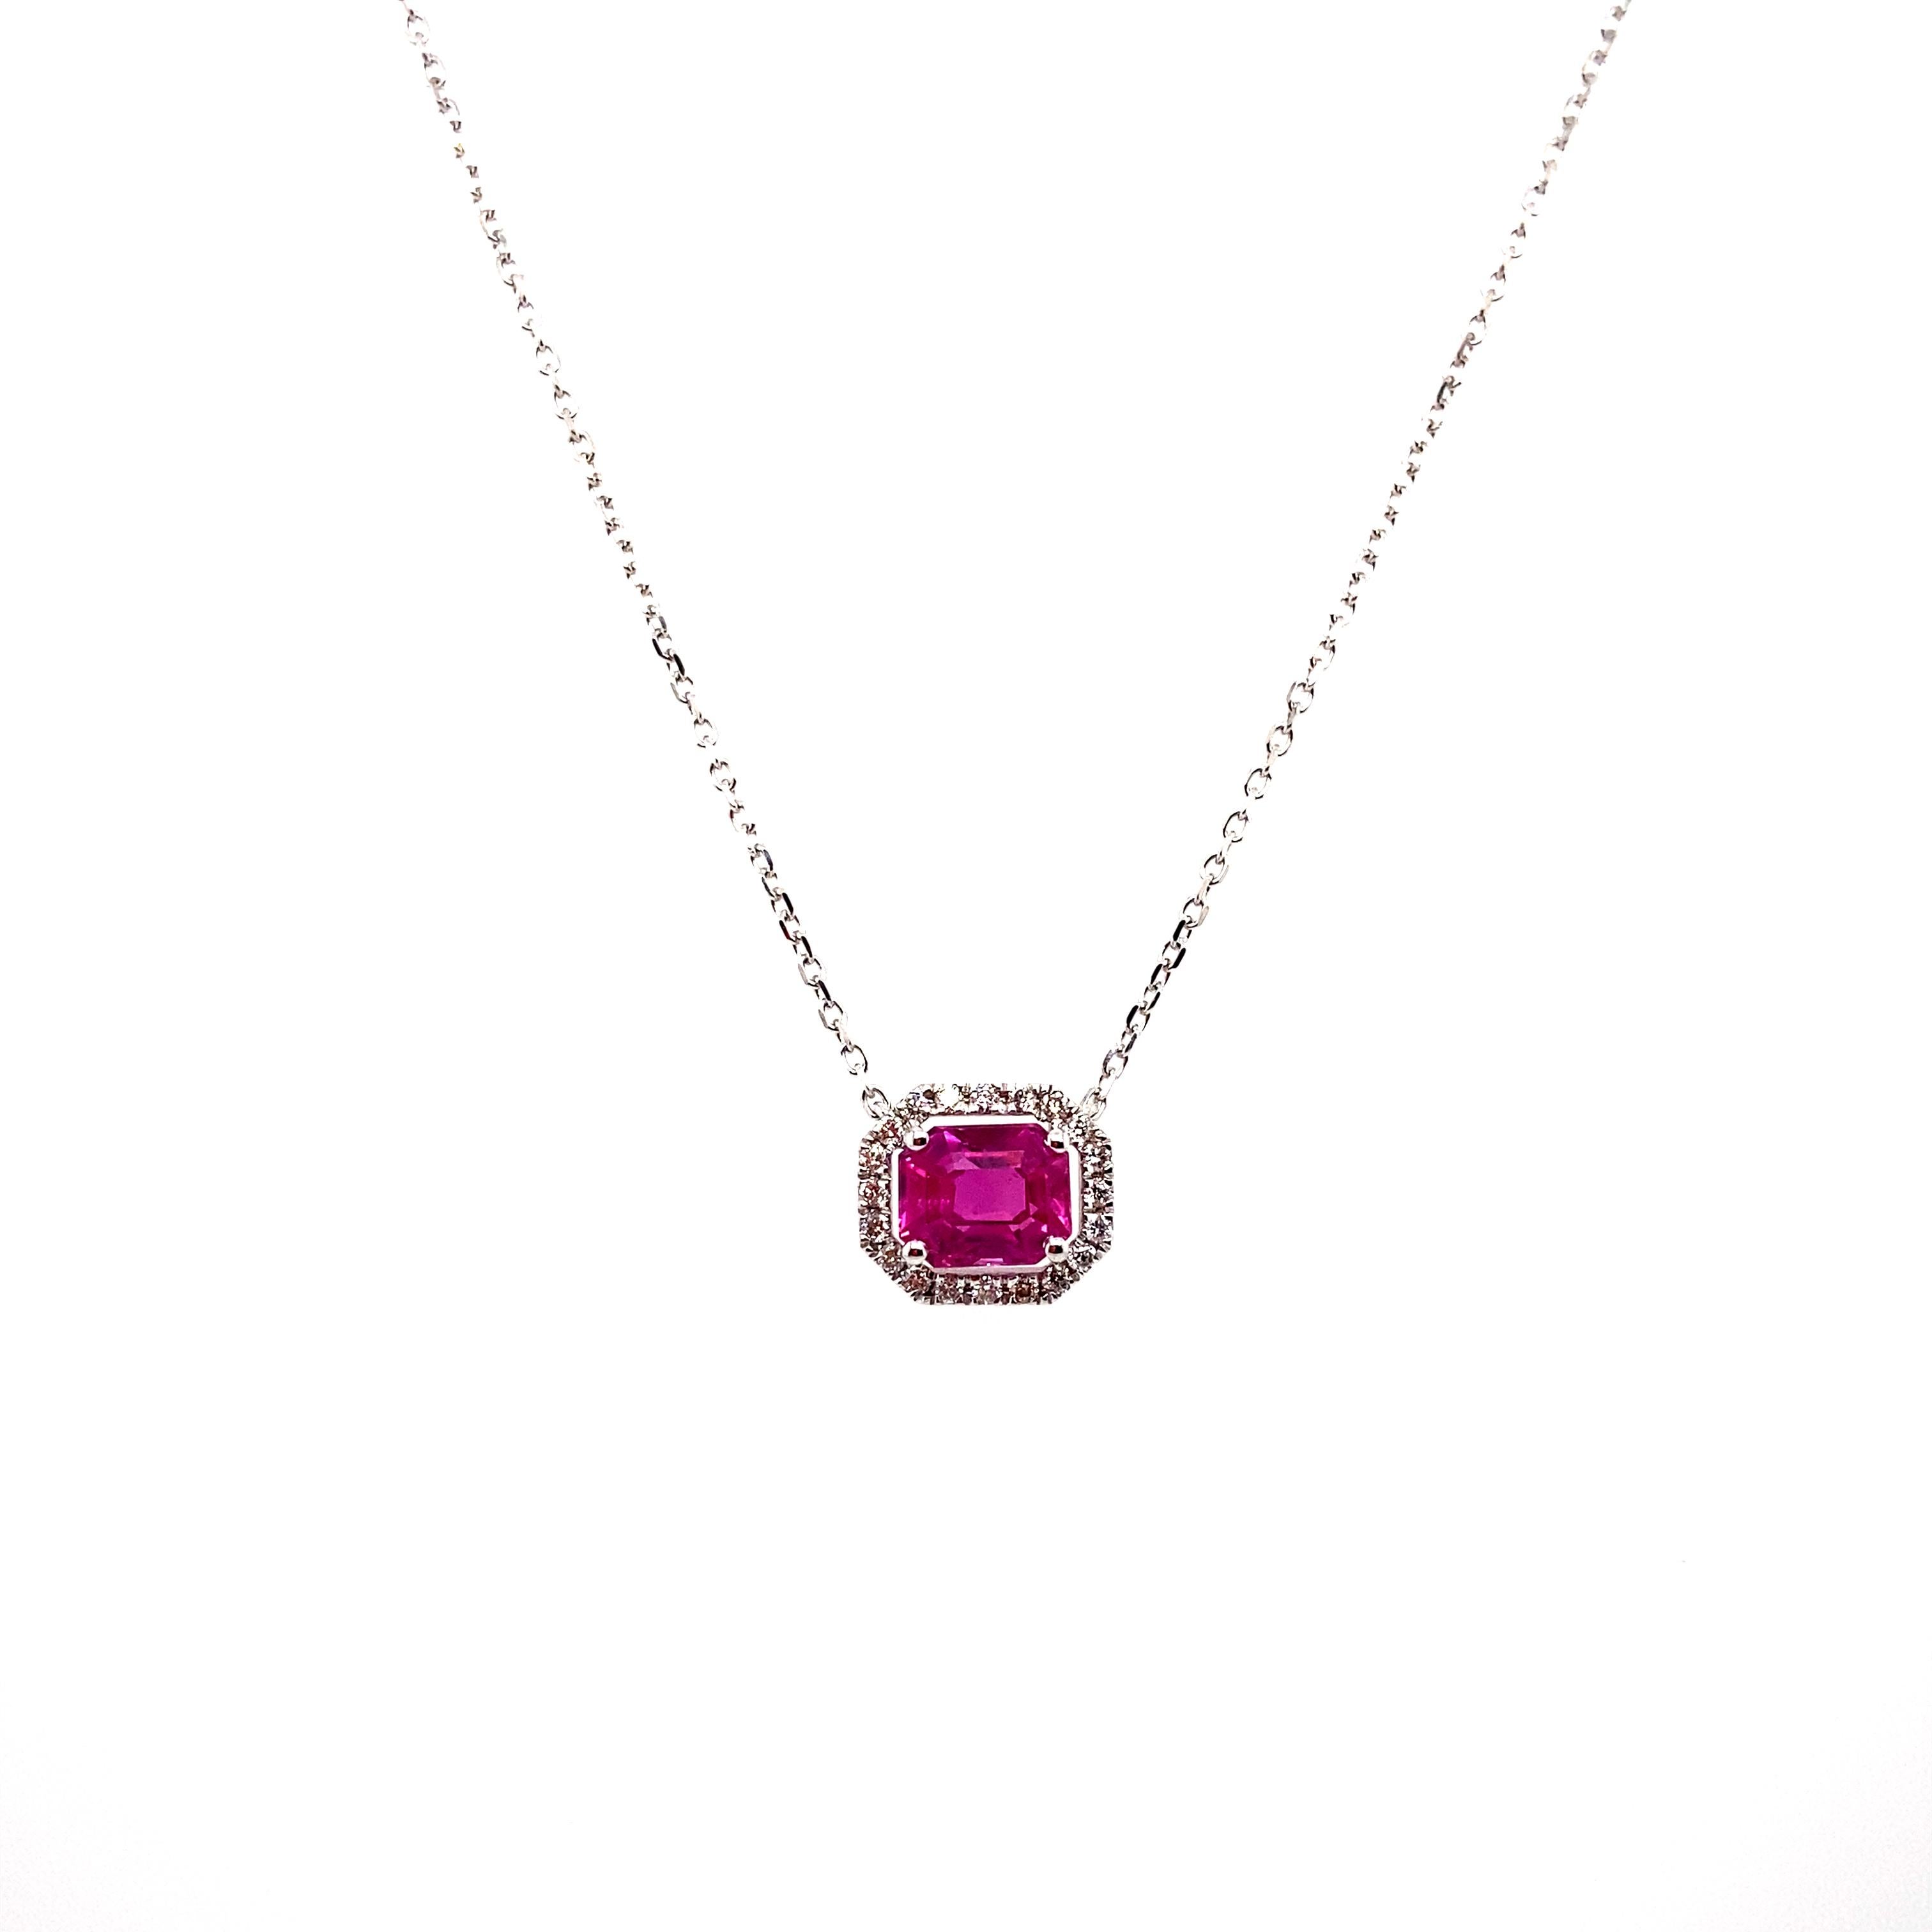 1.35 Carat Octagon-Cut Burma No Heat Ruby and White Diamond Pendant Necklace:

A beautiful pendant necklace, it features a 1.35 carat emerald-cut unheated Burmese ruby in the centre surrounded by a halo of white round-brilliant cut diamonds weighing